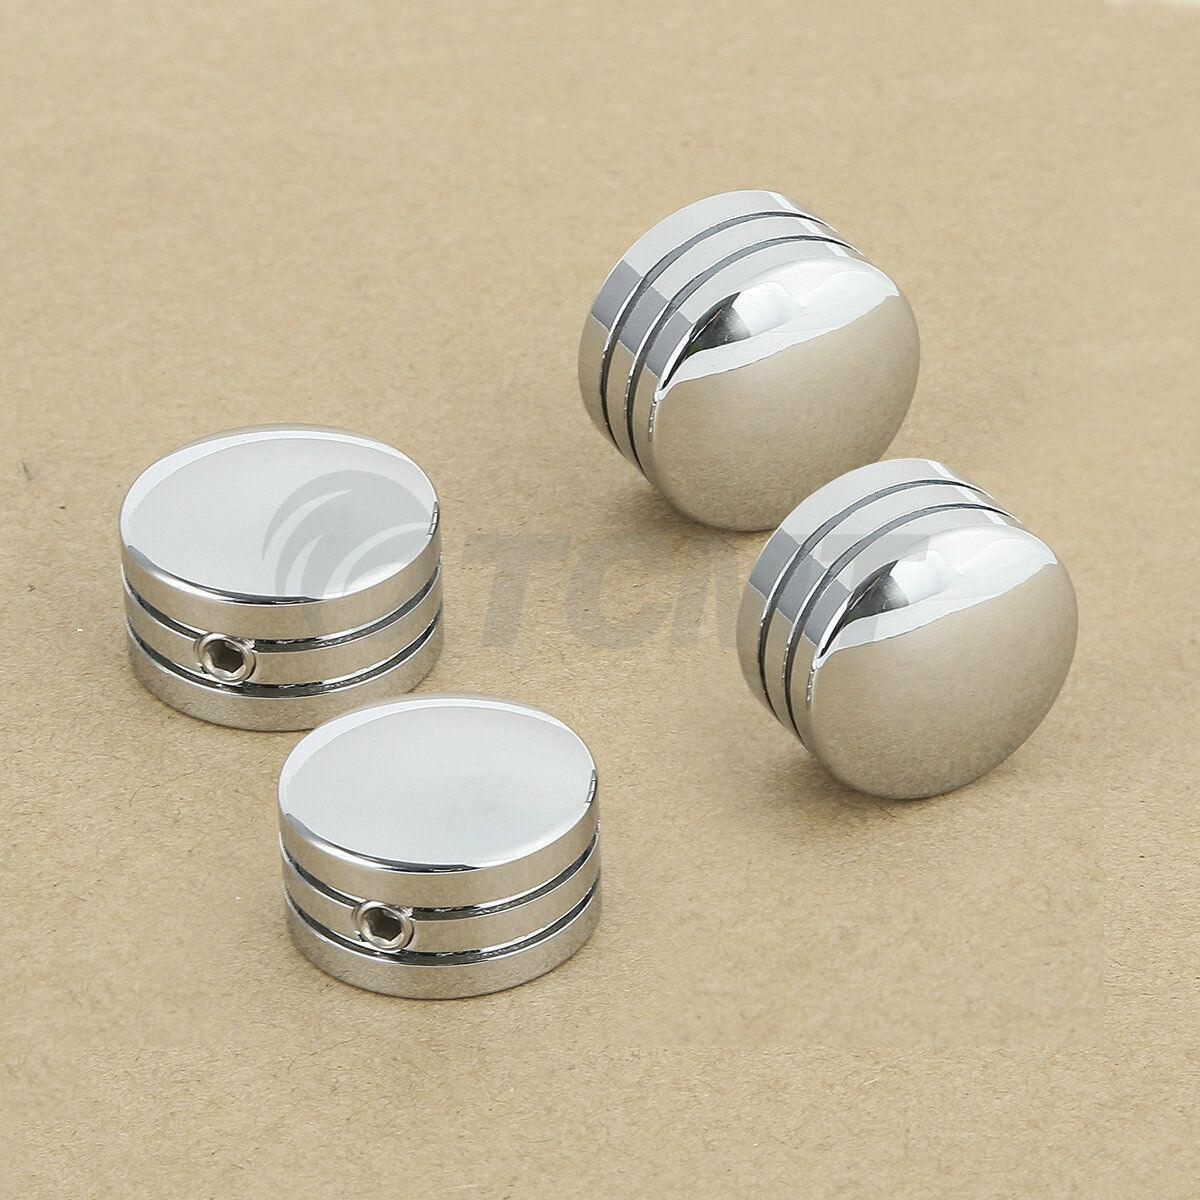 4PCS Chrome Head Bolt Cover Fit For Harley Sportster XL 86-18 Twin Cam 1999-2017 - Moto Life Products